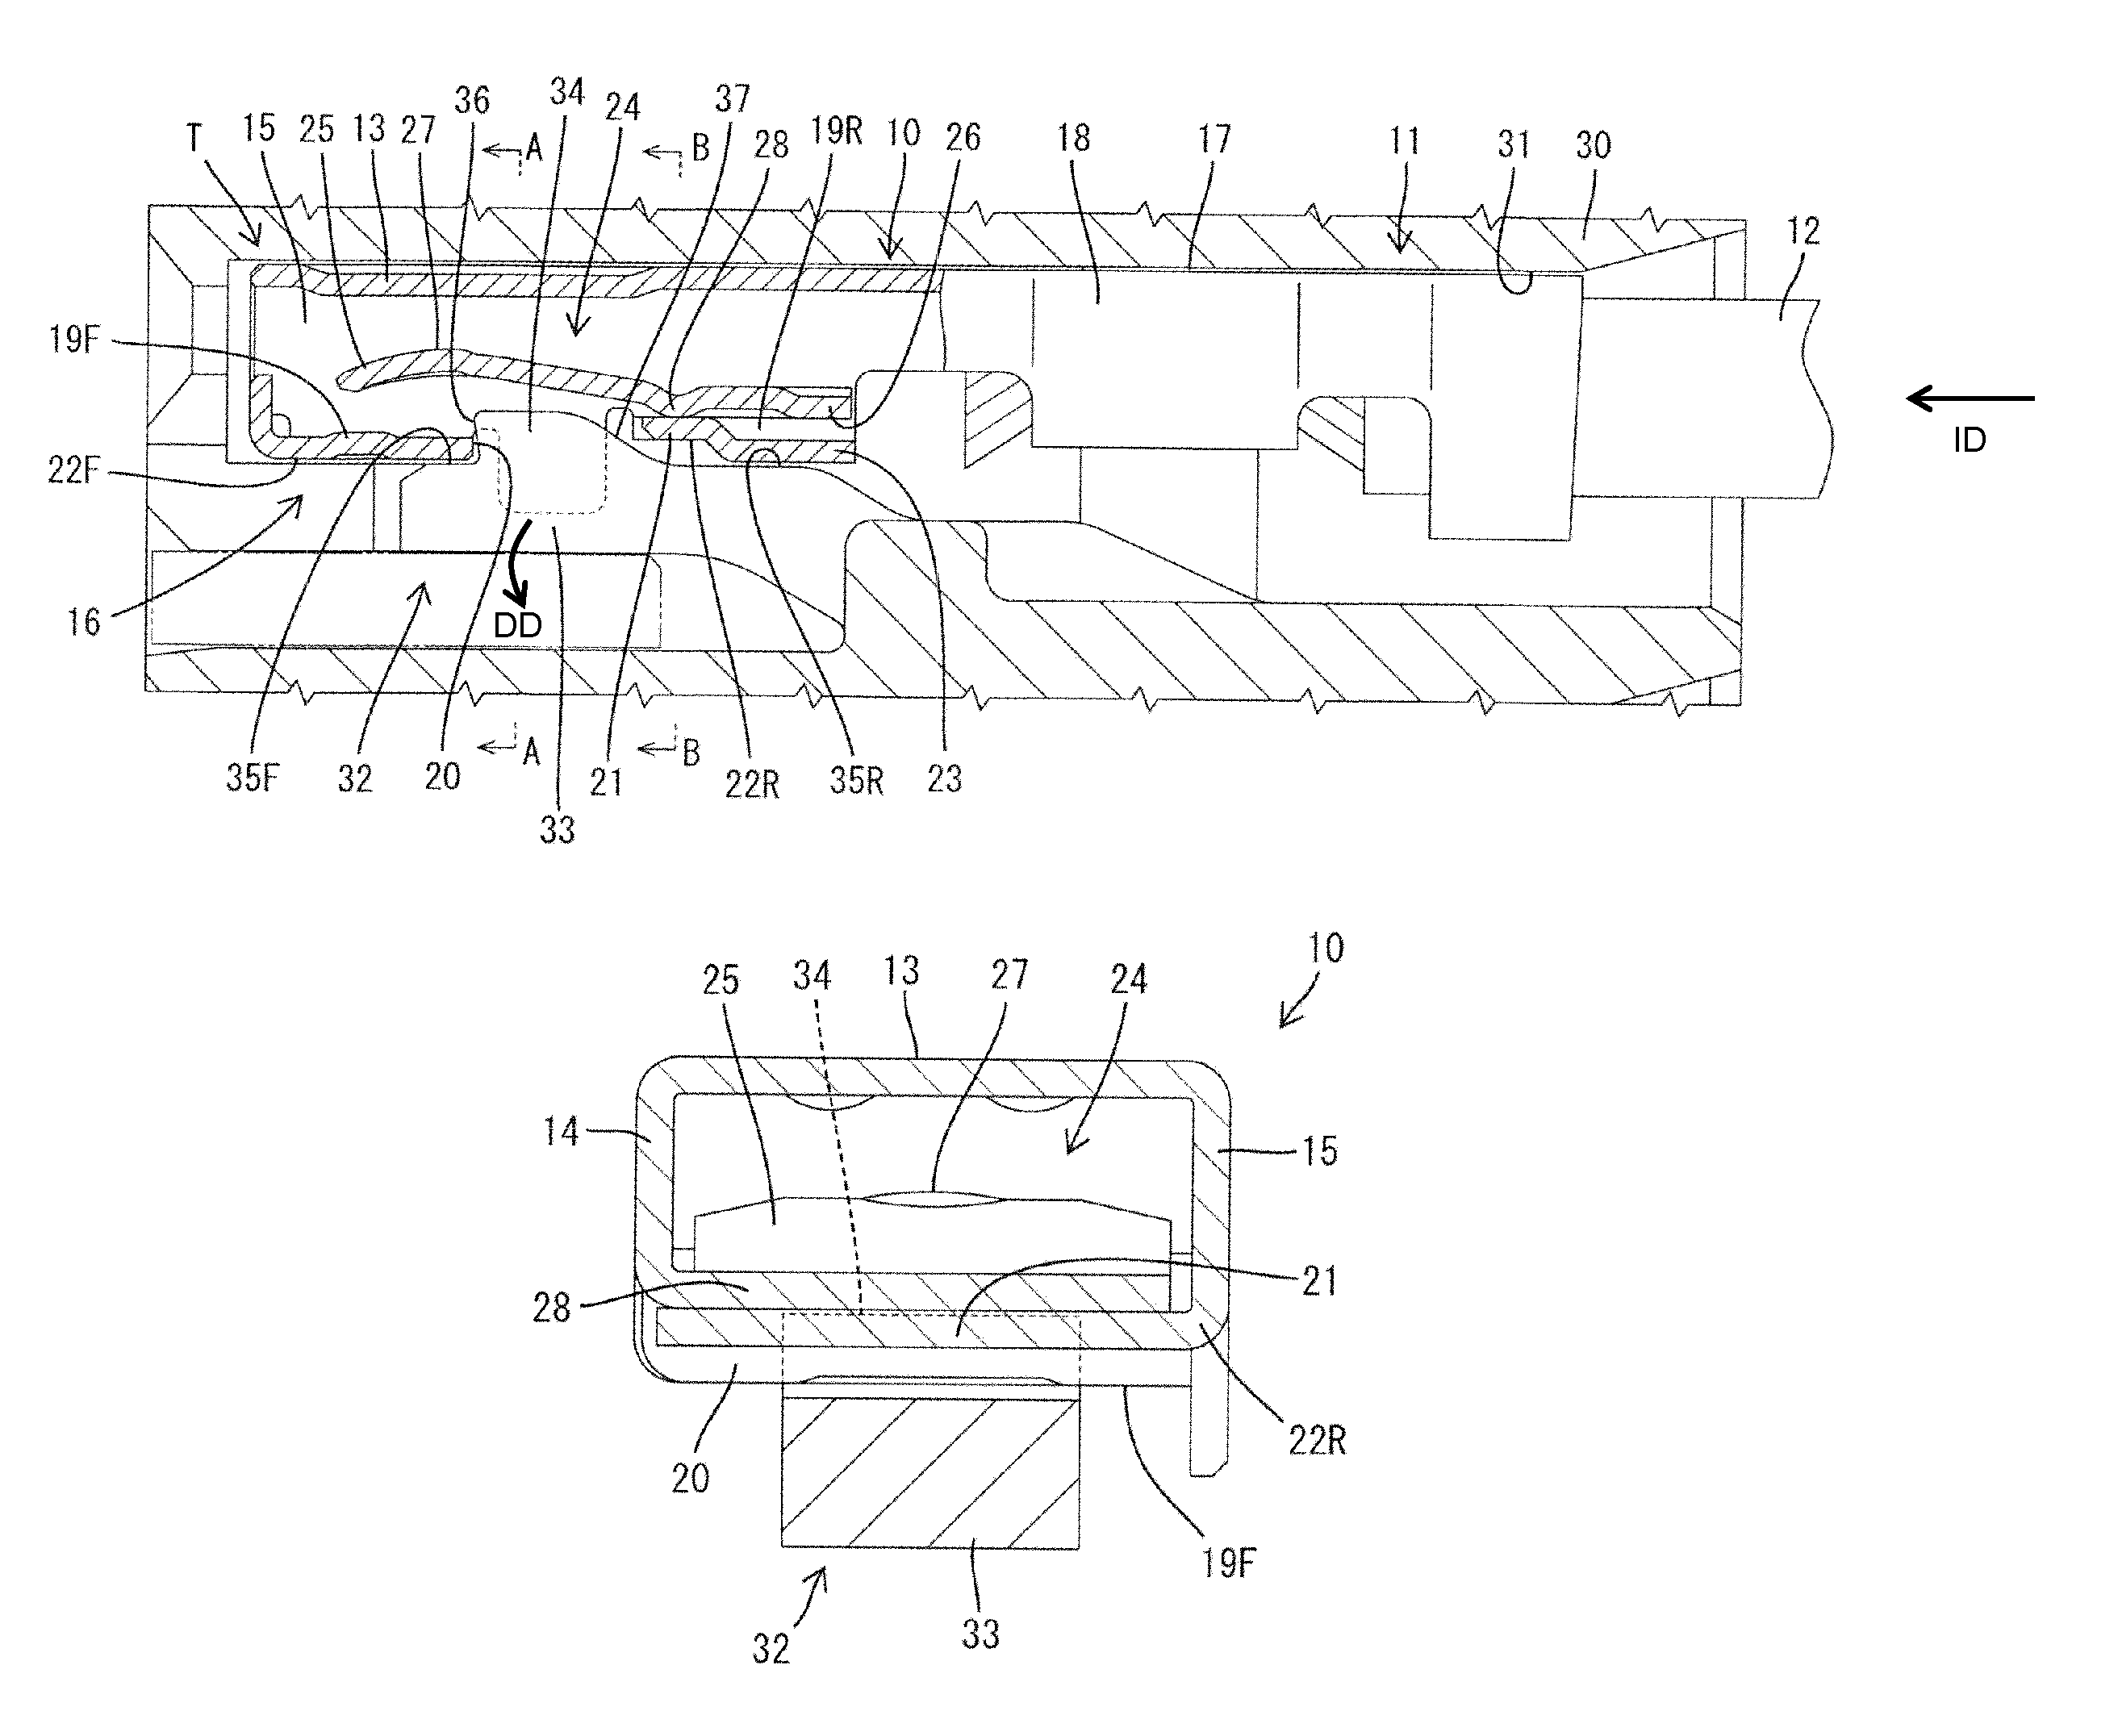 Terminal fitting having a retracted portion extending from one side plate to another side plate